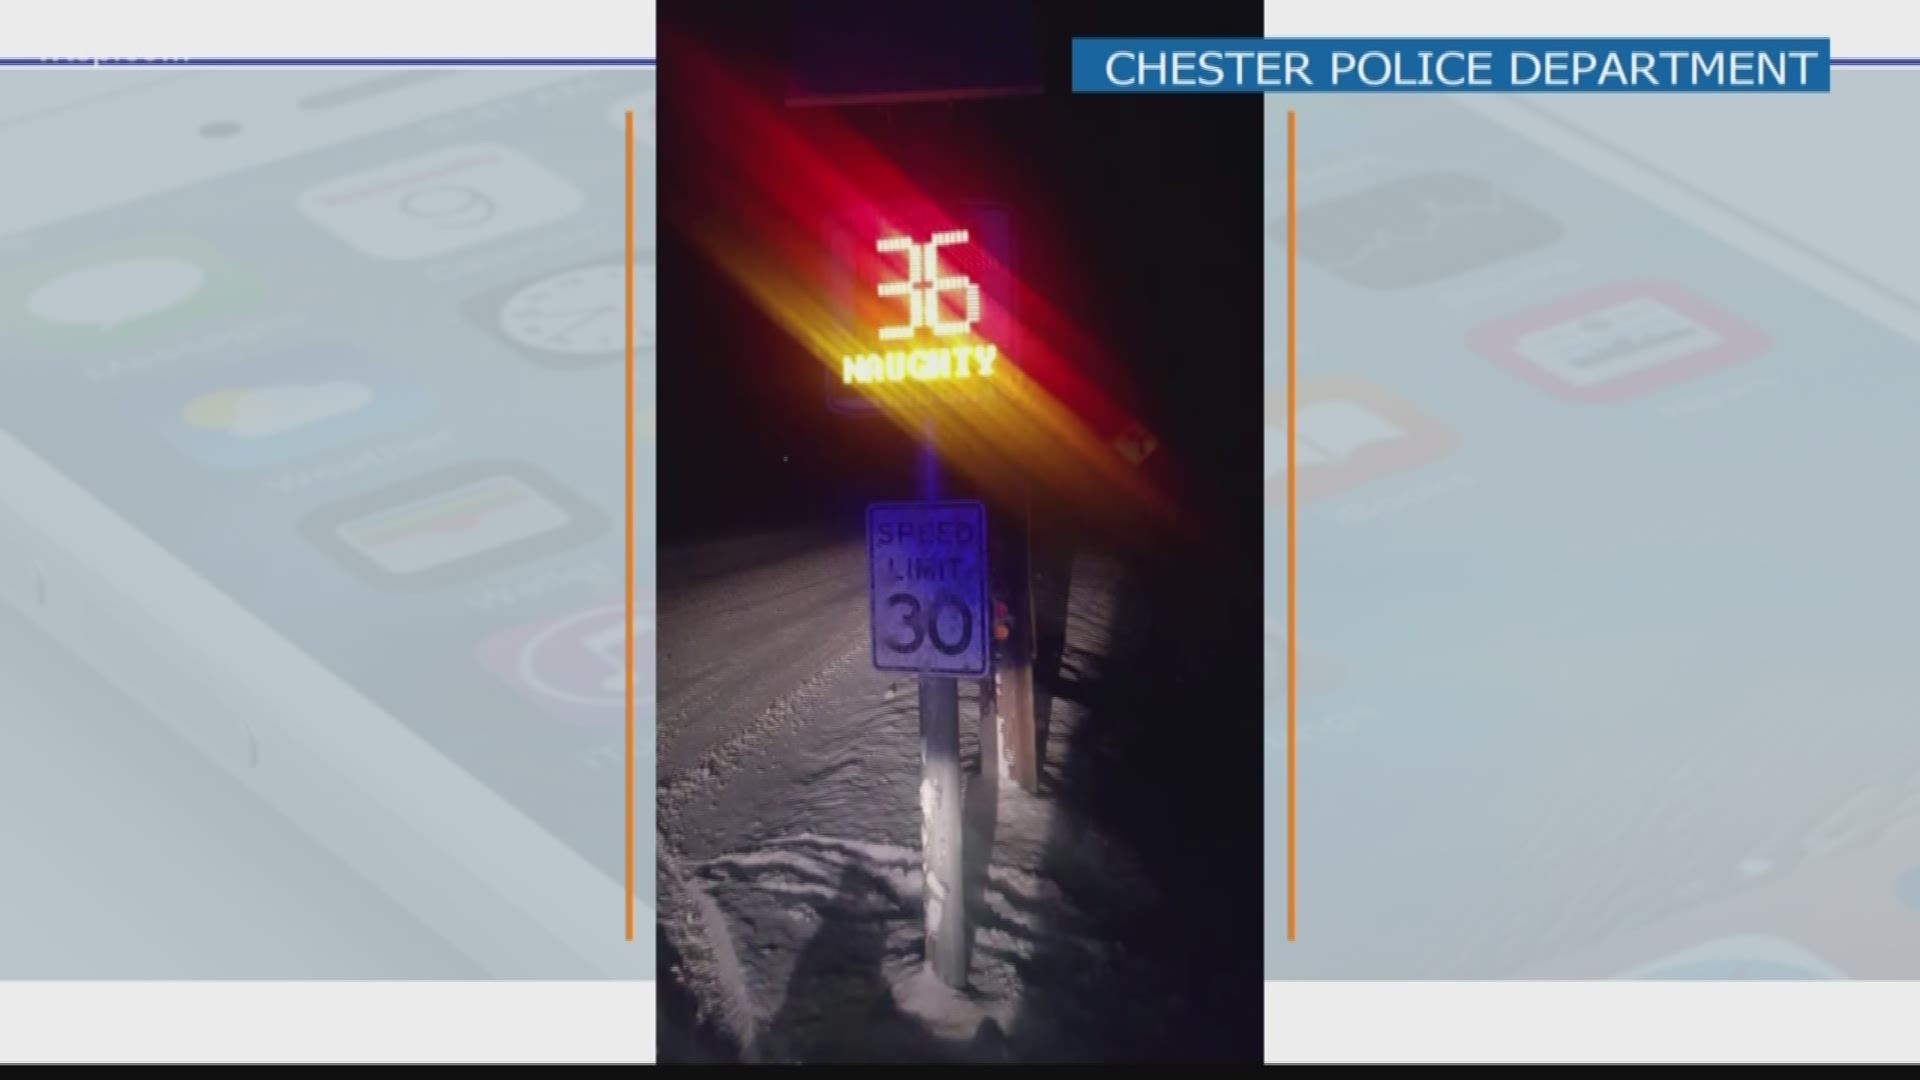 The Chester Police Department in Vermont has set up radar speed signs that read “naughty” or “nice” depending on how fast drivers are going.